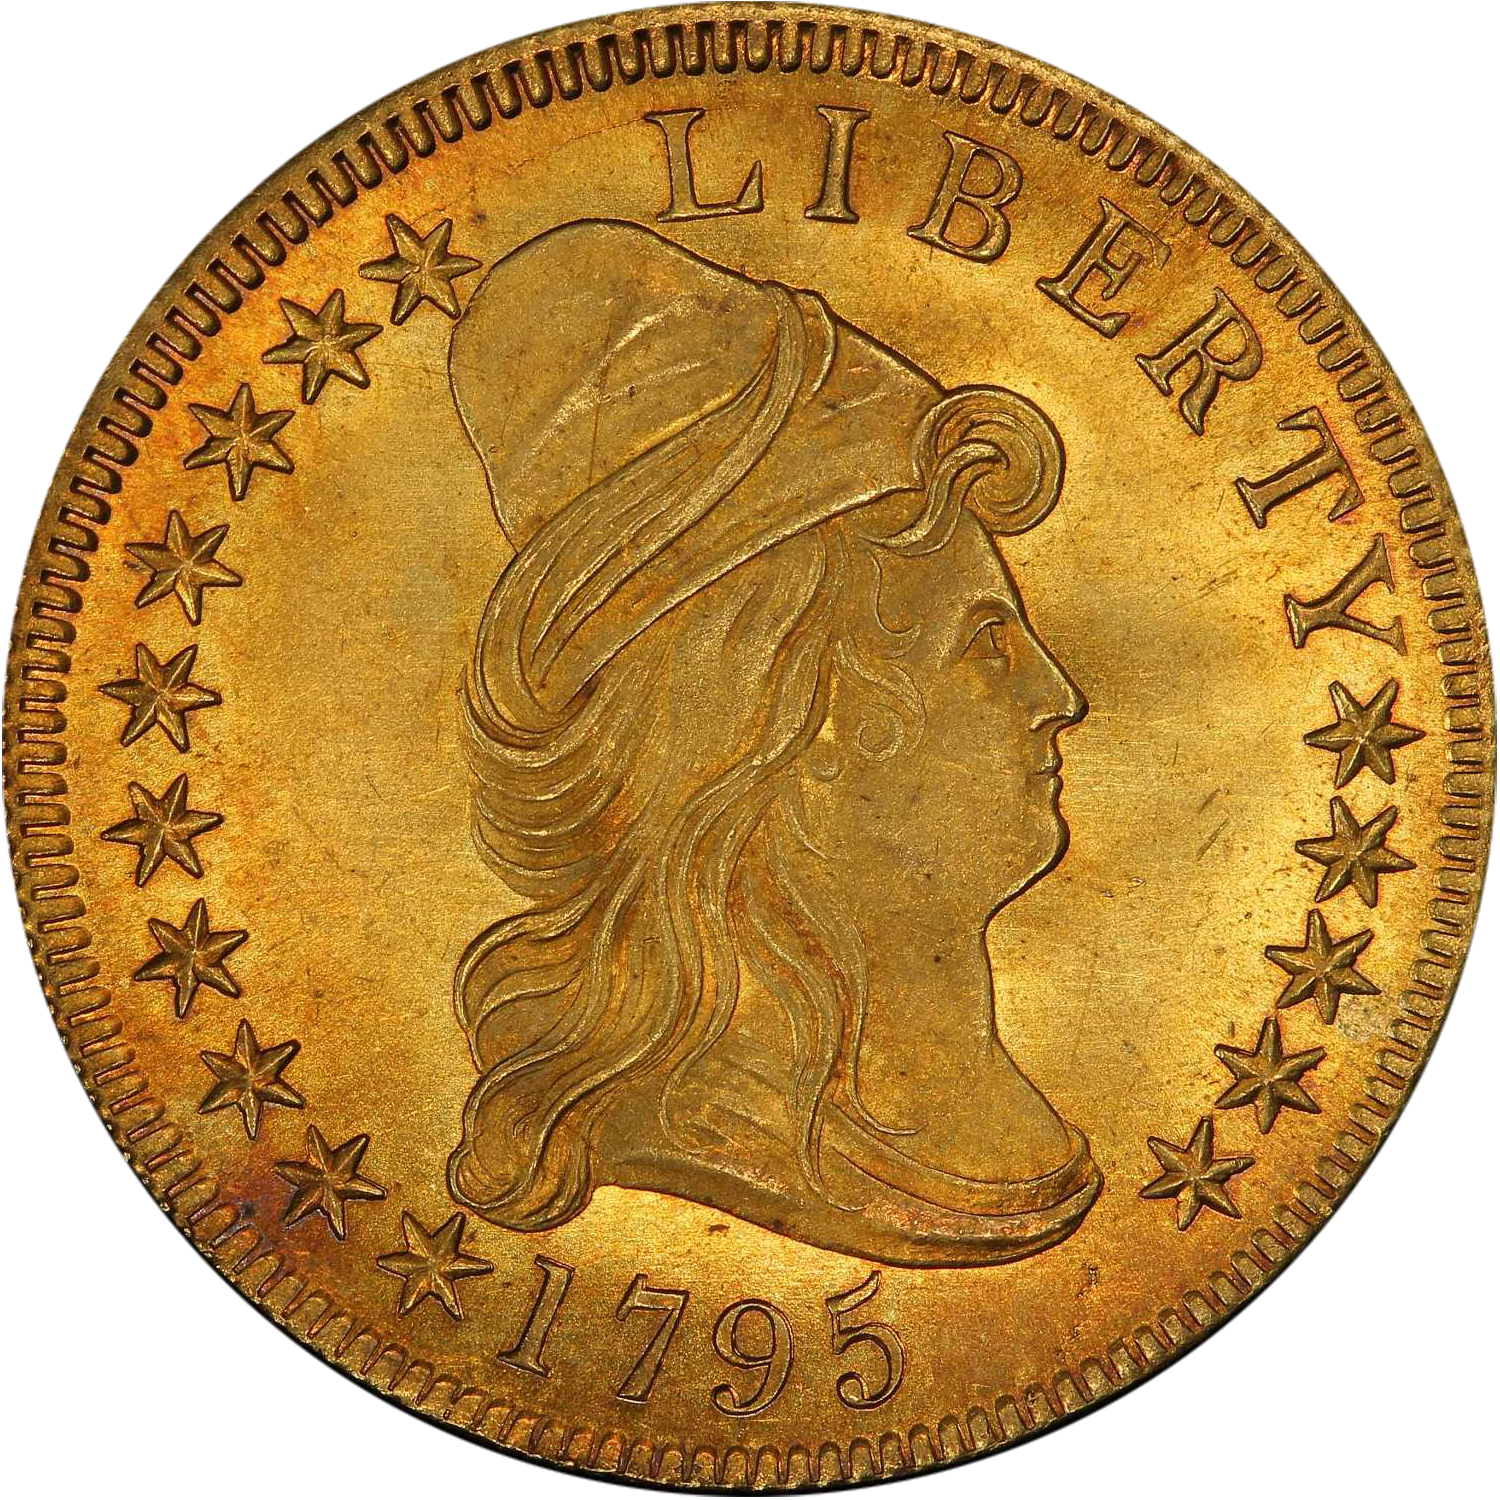 1795 capped bust right $10 gold